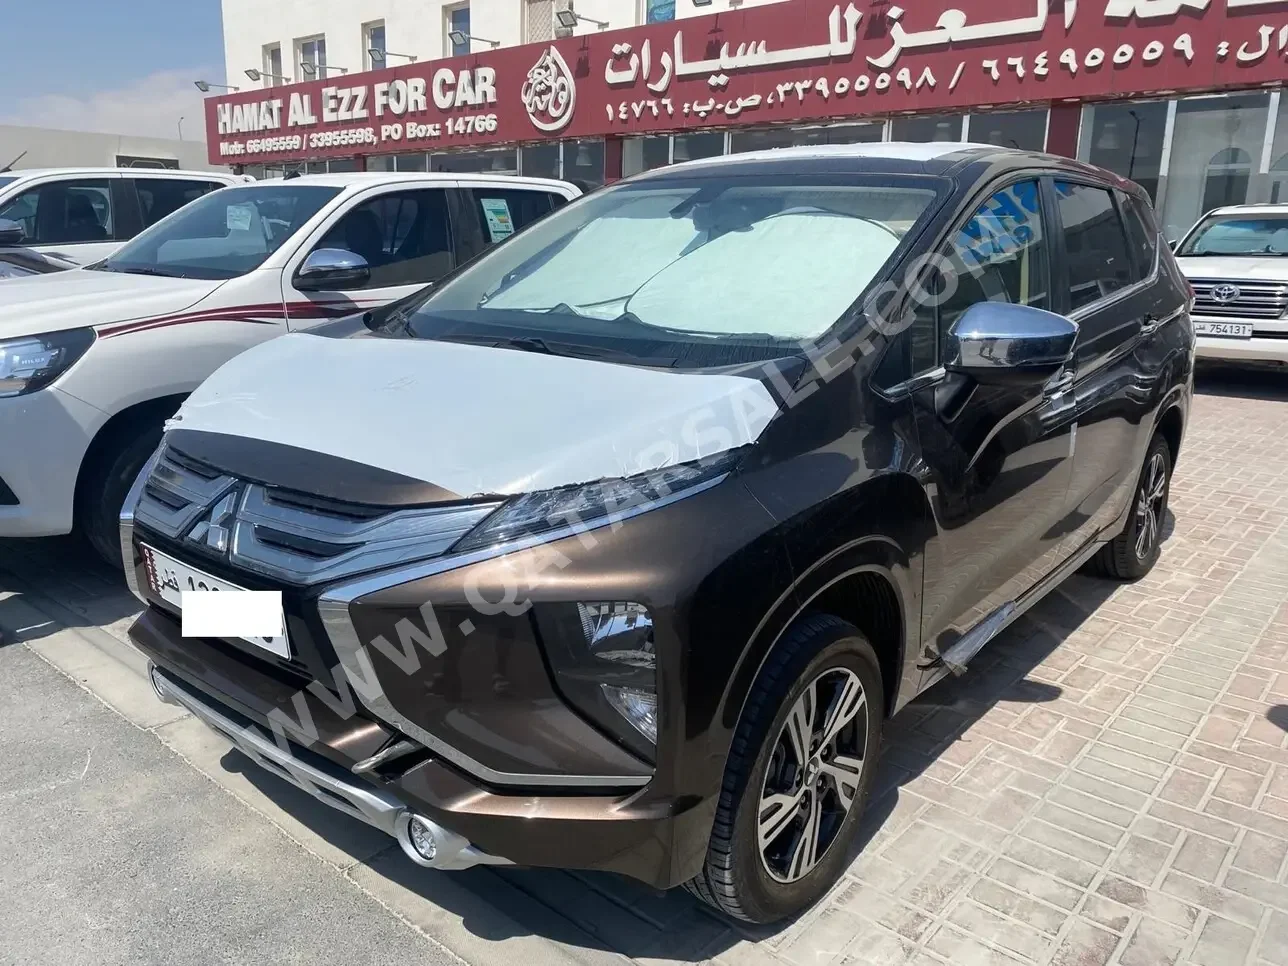 Mitsubishi  Xpander  2022  Automatic  0 Km  4 Cylinder  Front Wheel Drive (FWD)  SUV  Brown  With Warranty